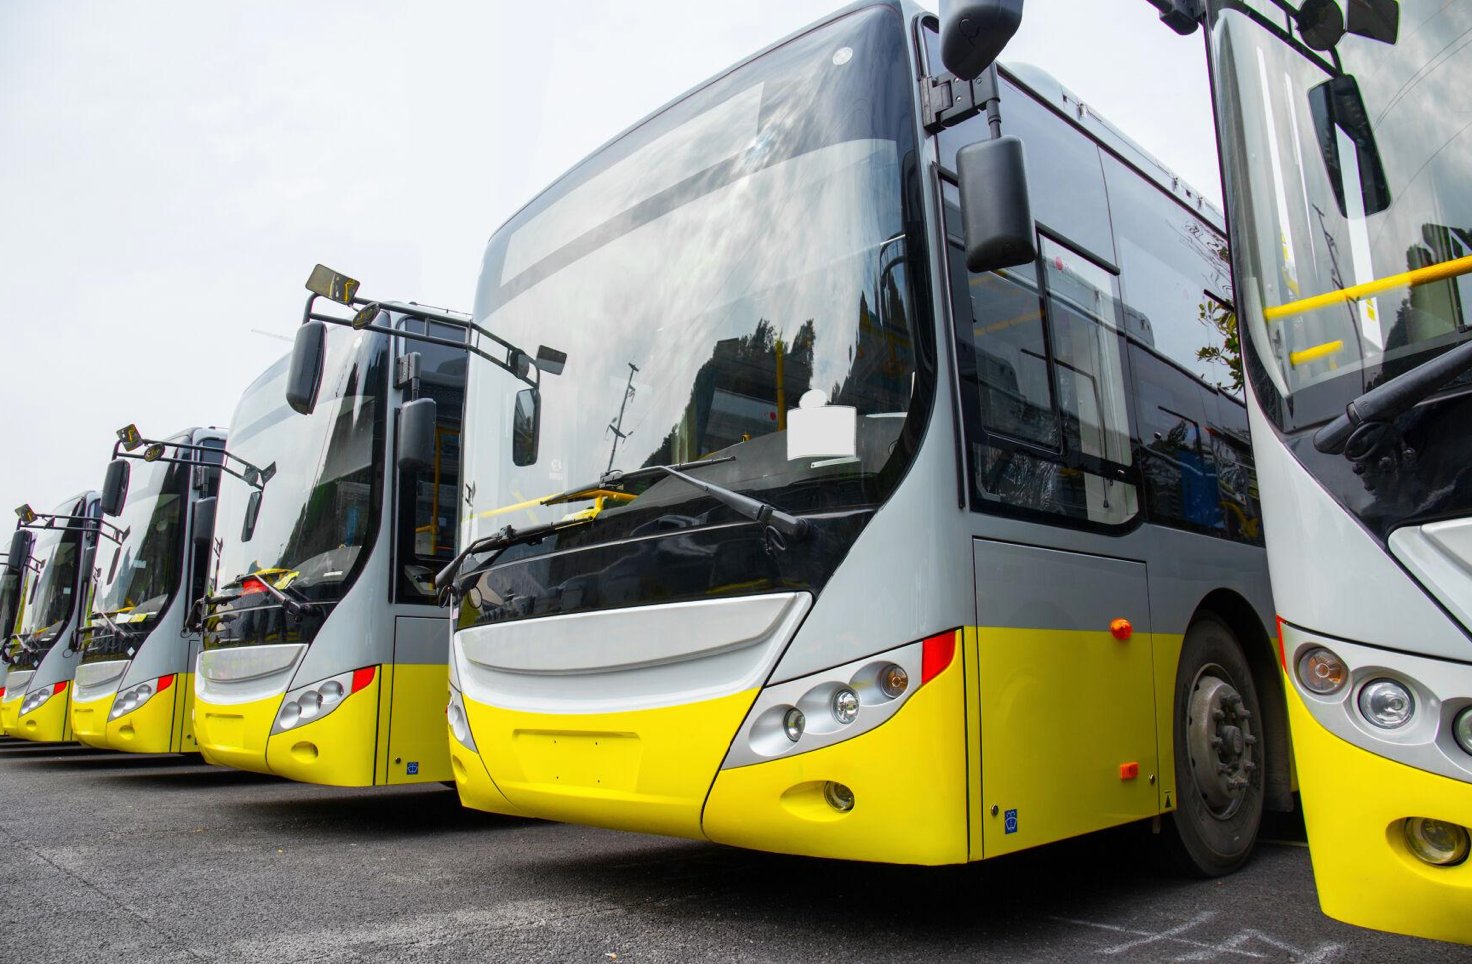 Electric buses sit in a parking lot.